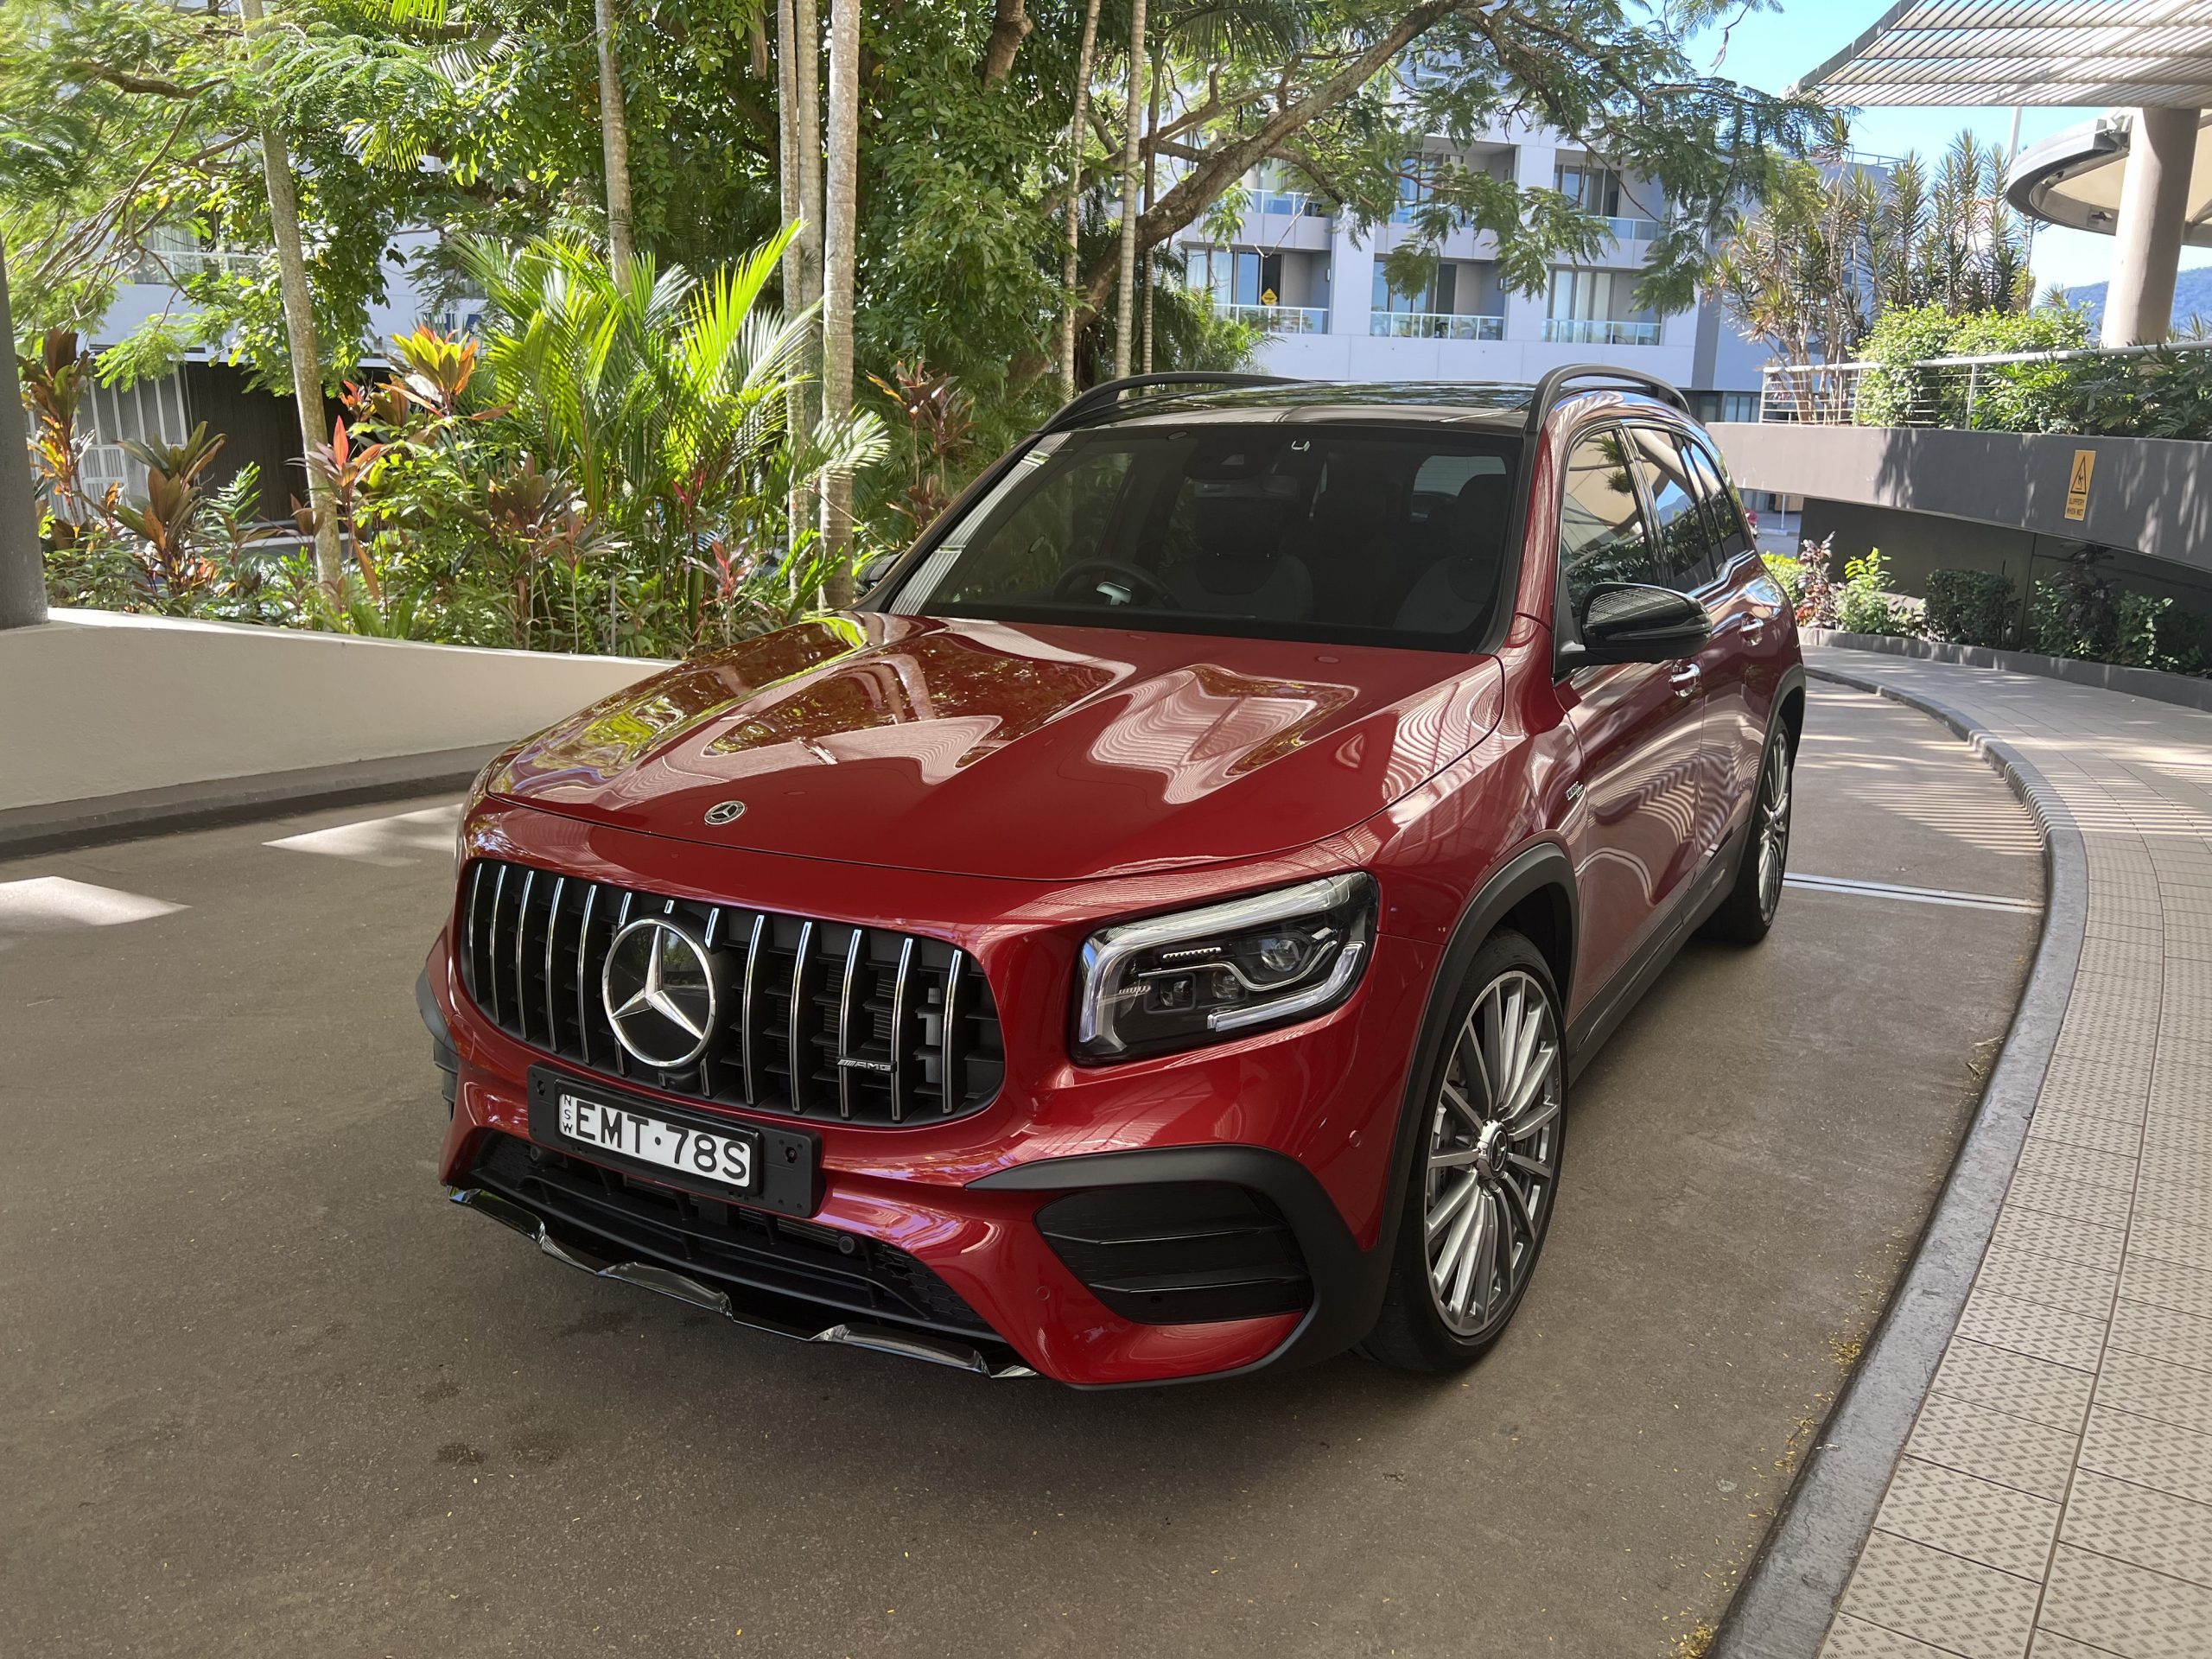 Mercedes AMG SUV Hilton Cairns scaled 1